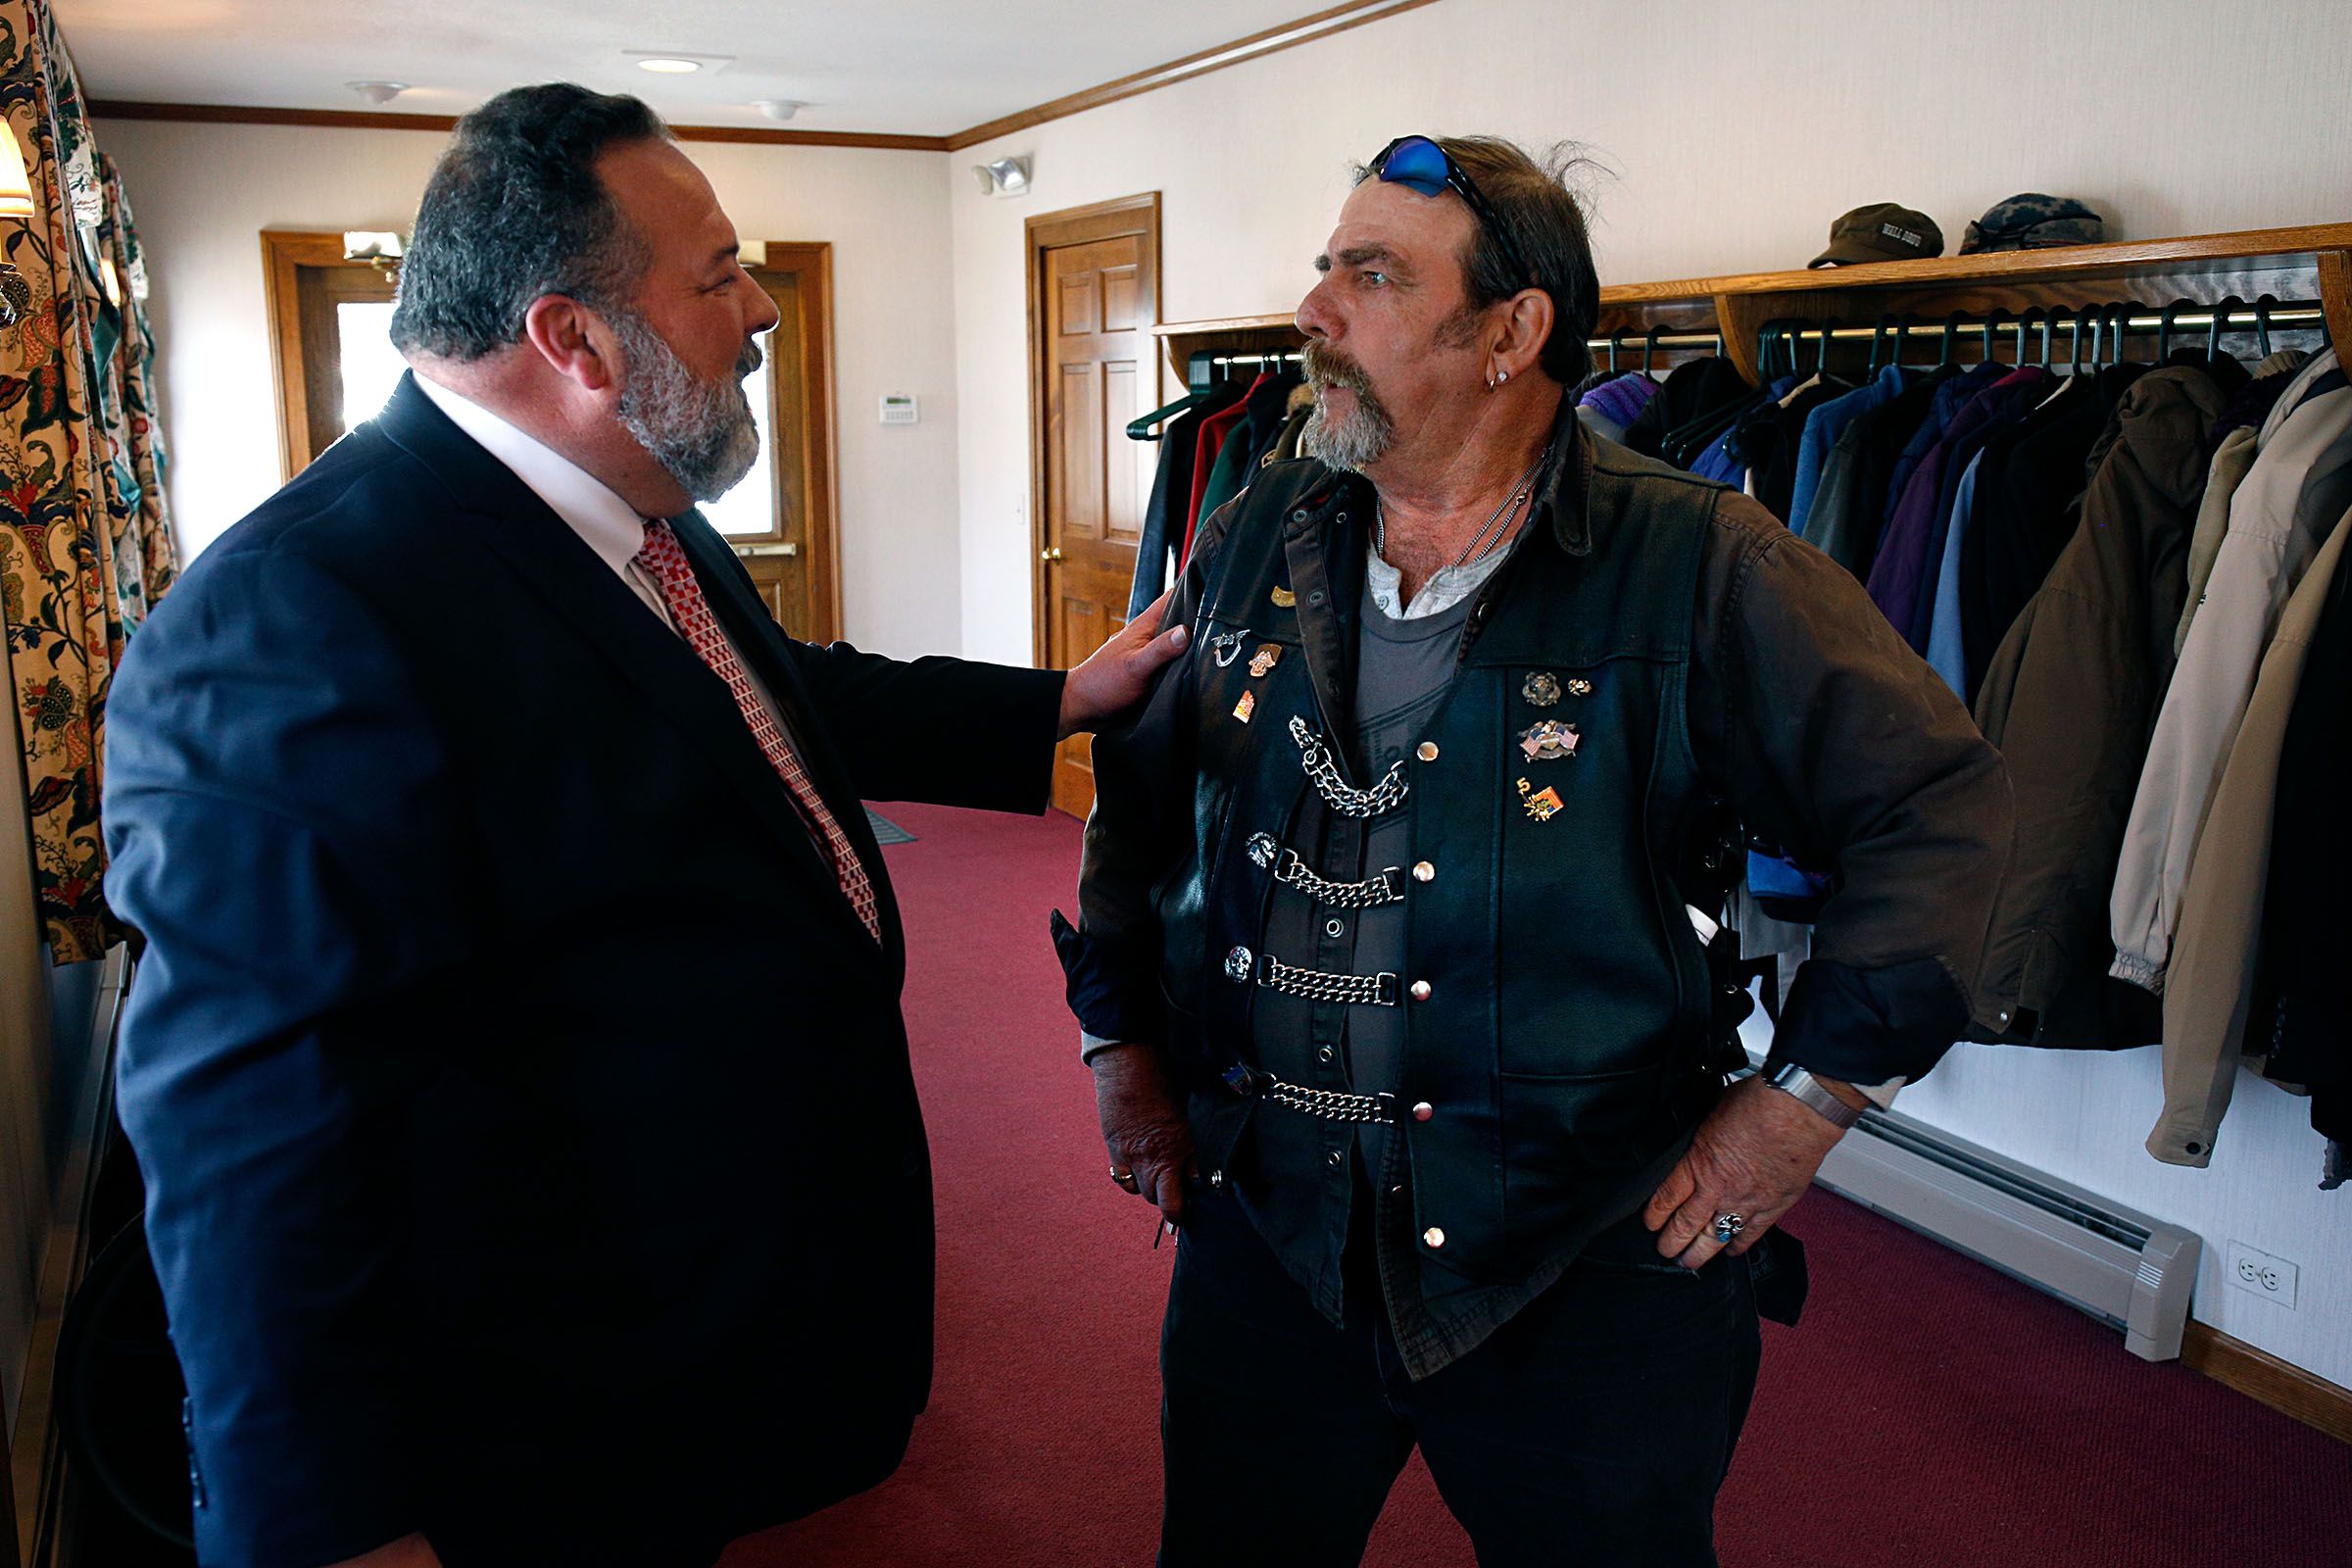 Ricker Funeral Home owner David Ahern speaks with Rodney Young, of Bradford, Vt., about the Harley Davidson motorcycle Young rode from his home to a memorial service for Fay "Woody" Woodward in Lebanon, N.H., on April 2, 2019. Young said it was 34 degrees when he hit the road to be part of a tribute for Woodward, who was a member of the Upper Valley chapter of the Harley Owners Group. (Valley News - Geoff Hansen) Copyright Valley News. May not be reprinted or used online without permission. Send requests to permission@vnews.com.